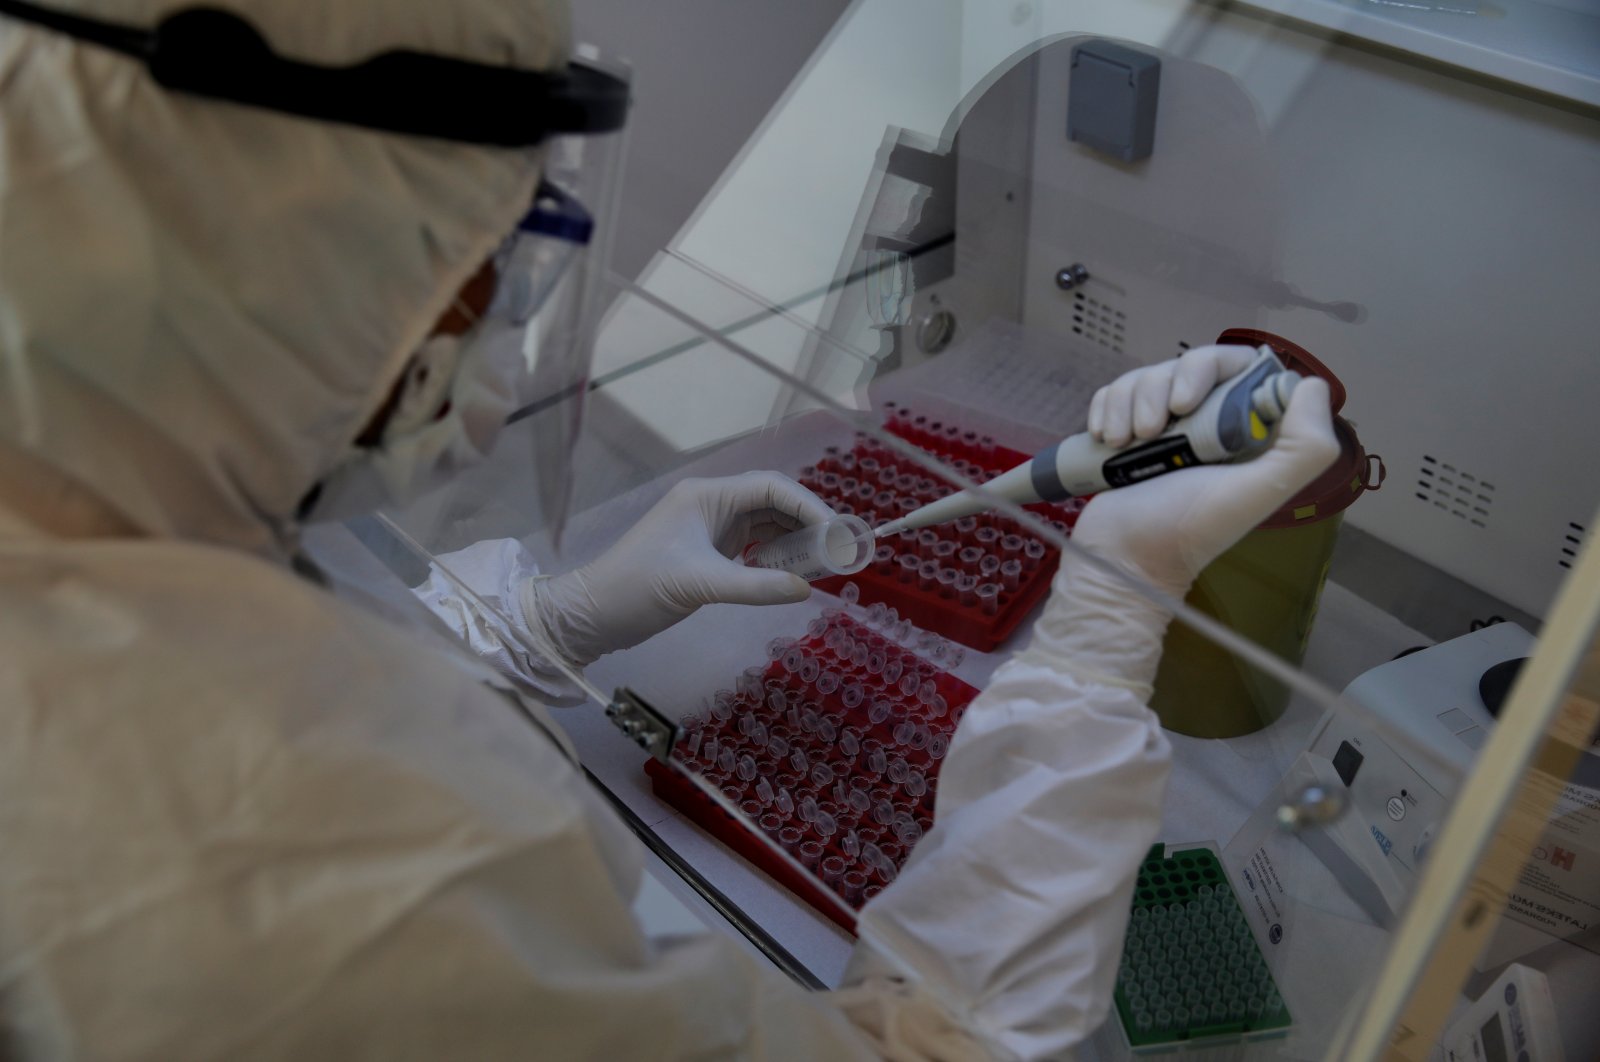 A biologist works on samples from test tubes to check if any of them tested positive for coronavirus at a laboratory in Istanbul, Turkey, April 14, 2020. (Reuters Photo)